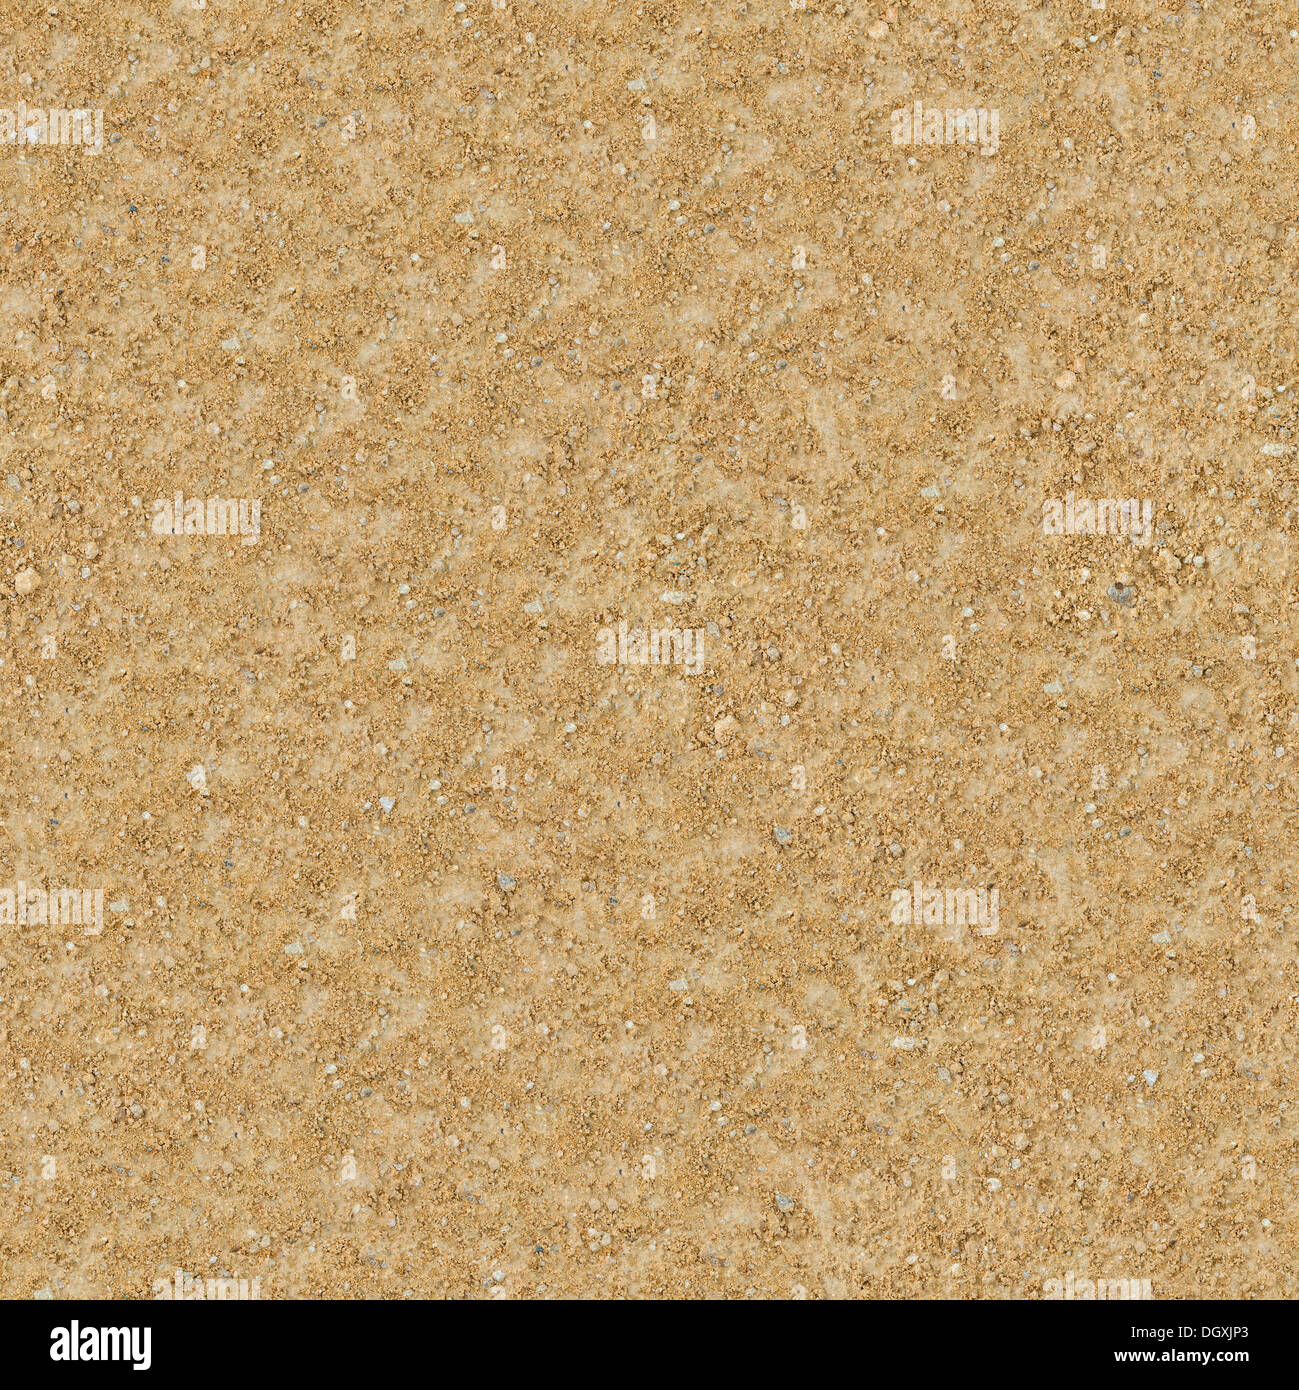 Seamless Texture of Sandstone Country Road. Stock Photo